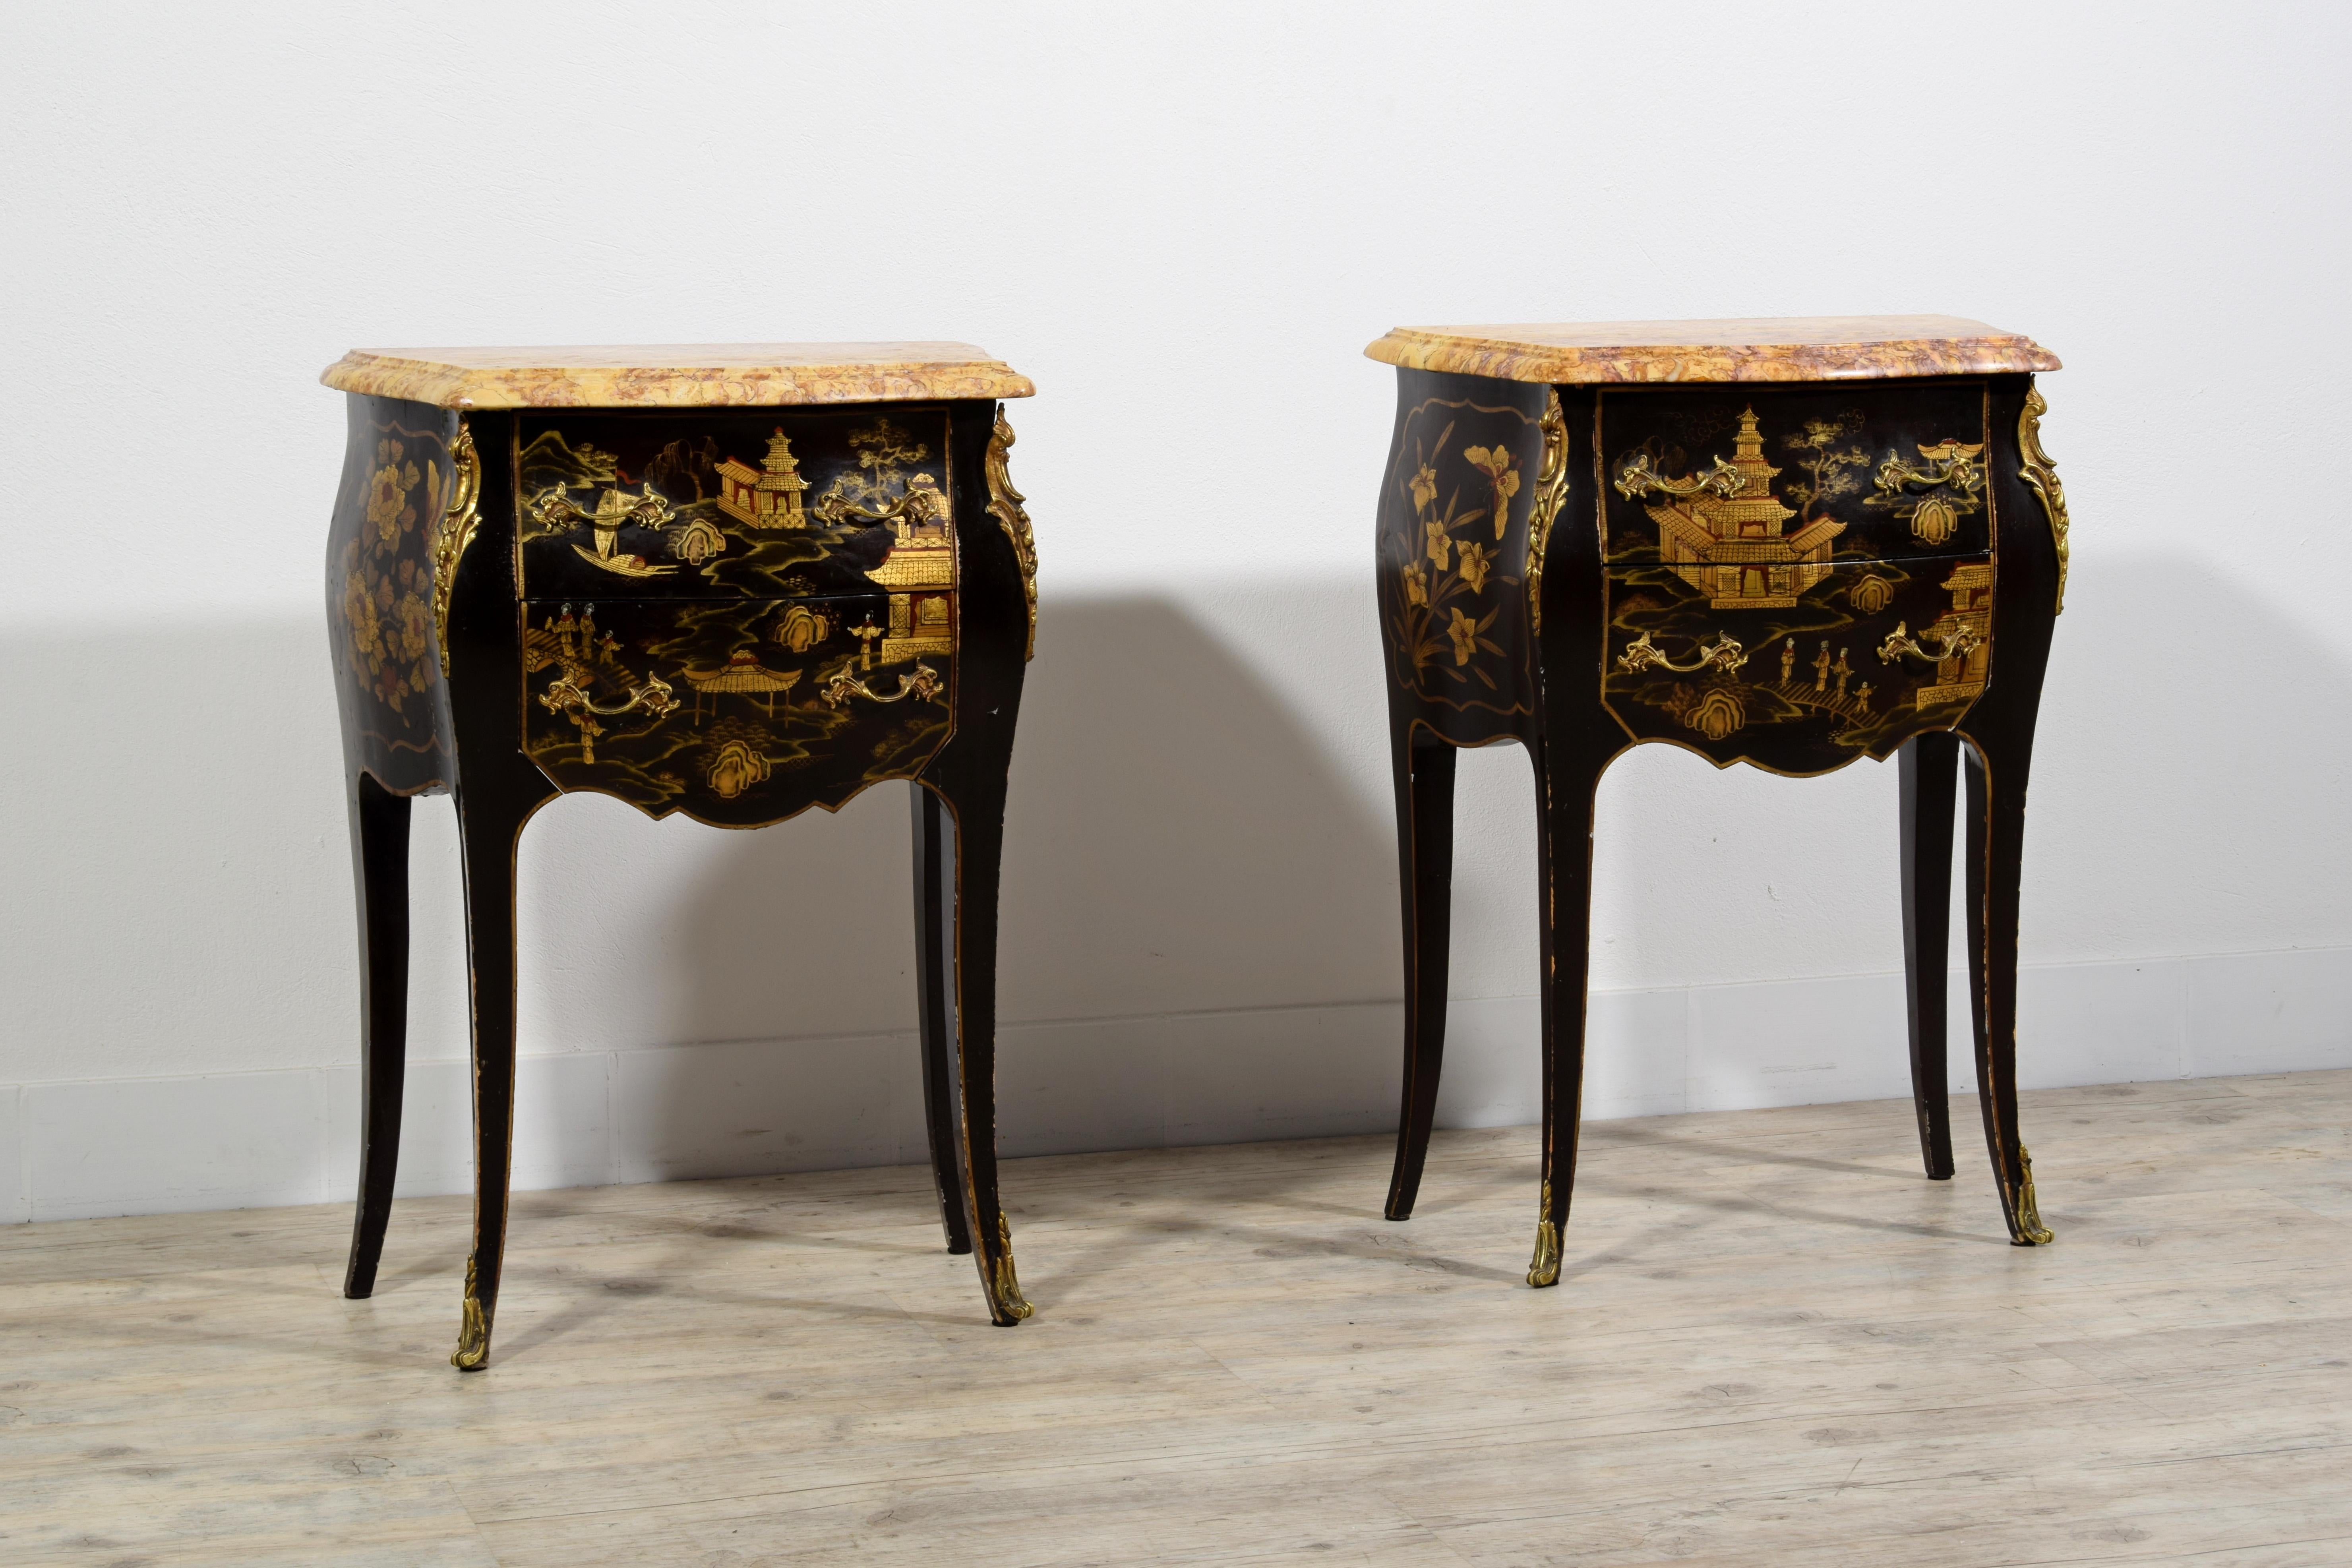 20th century, French Louis XV style Chinoiserie Lacquered Wood Night Stend 

This pair of bedside tables was made in the 20th century, in France, in Louis XV style.
They have a marble top of Broccatello di Spagna moulded and with a wavy profile. The